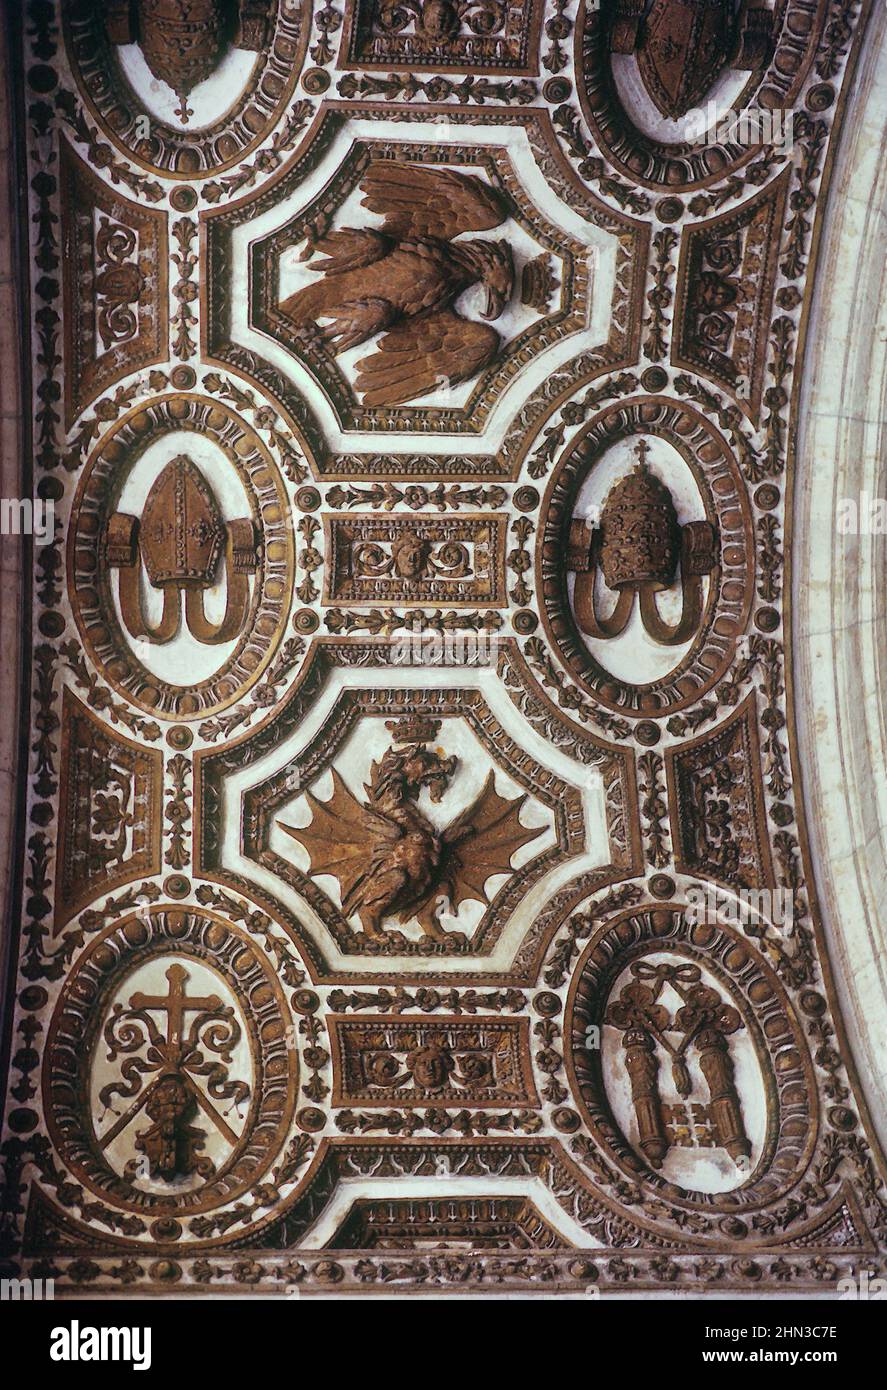 Ceiling decoration featuring emblems of the Papacy, in the Vatican Museum, Rome Stock Photo